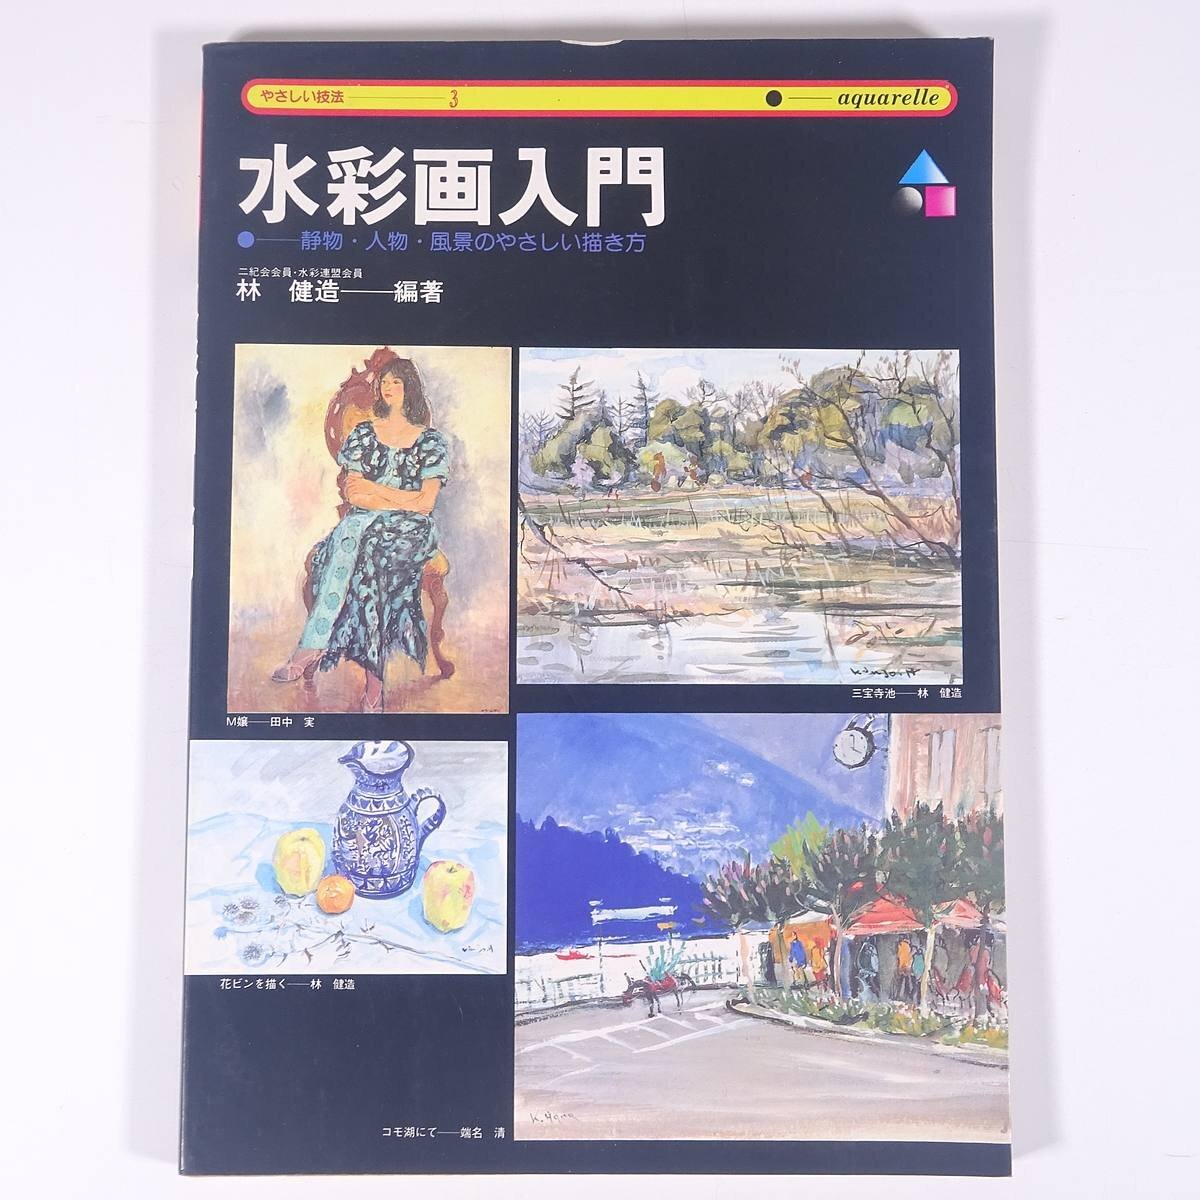 Introduction to Watercolor Painting Edited by Kenzo Hayashi Easy Techniques 3 Nagaoka Shoten 1979 Large Book Art Art Painting Watercolor Painting Technique Book, art, entertainment, painting, Technique book